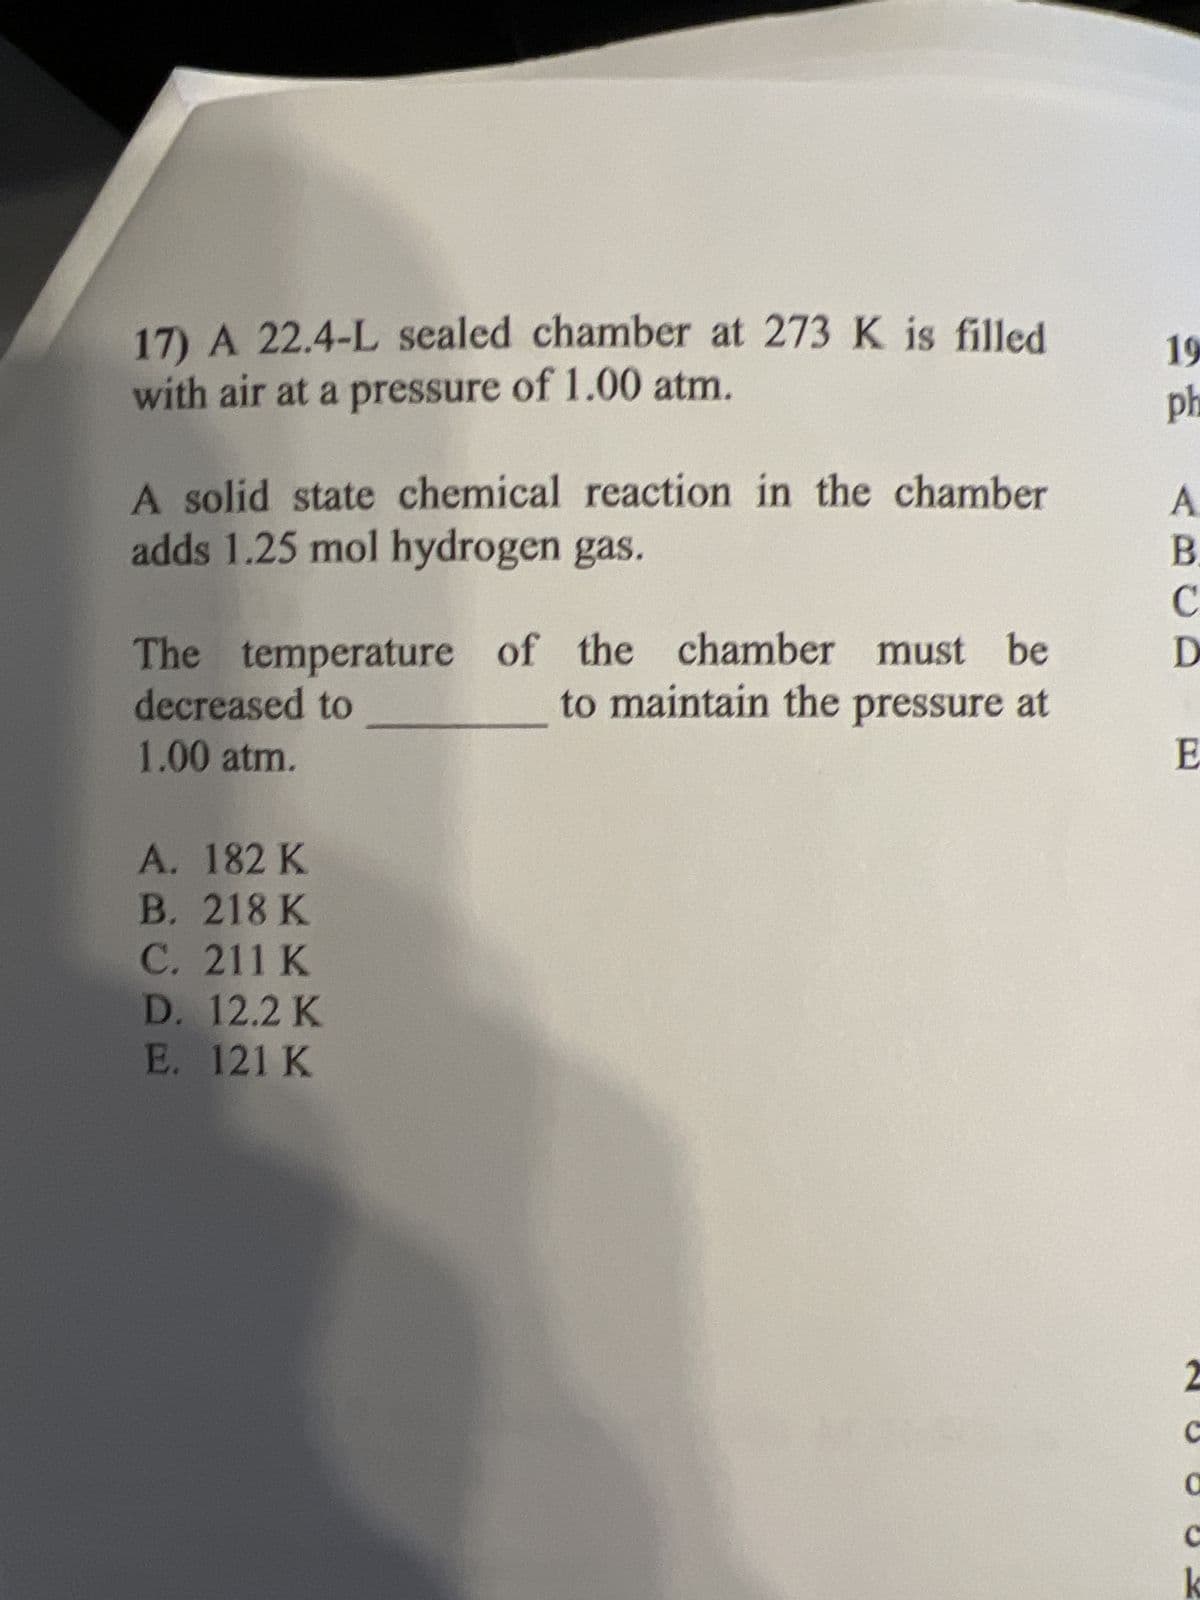 17) A 22.4-L sealed chamber at 273 K is filled
with air at a pressure of 1.00 atm.
A solid state chemical reaction in the chamber
adds 1.25 mol hydrogen gas.
The temperature of the chamber must be
decreased to
to maintain the pressure at
1.00 atm.
A. 182 K
B. 218 K
C. 211 K
D. 12.2 K
E. 121 K
19
ph
A
B.
C
D
E
2
C
0
k